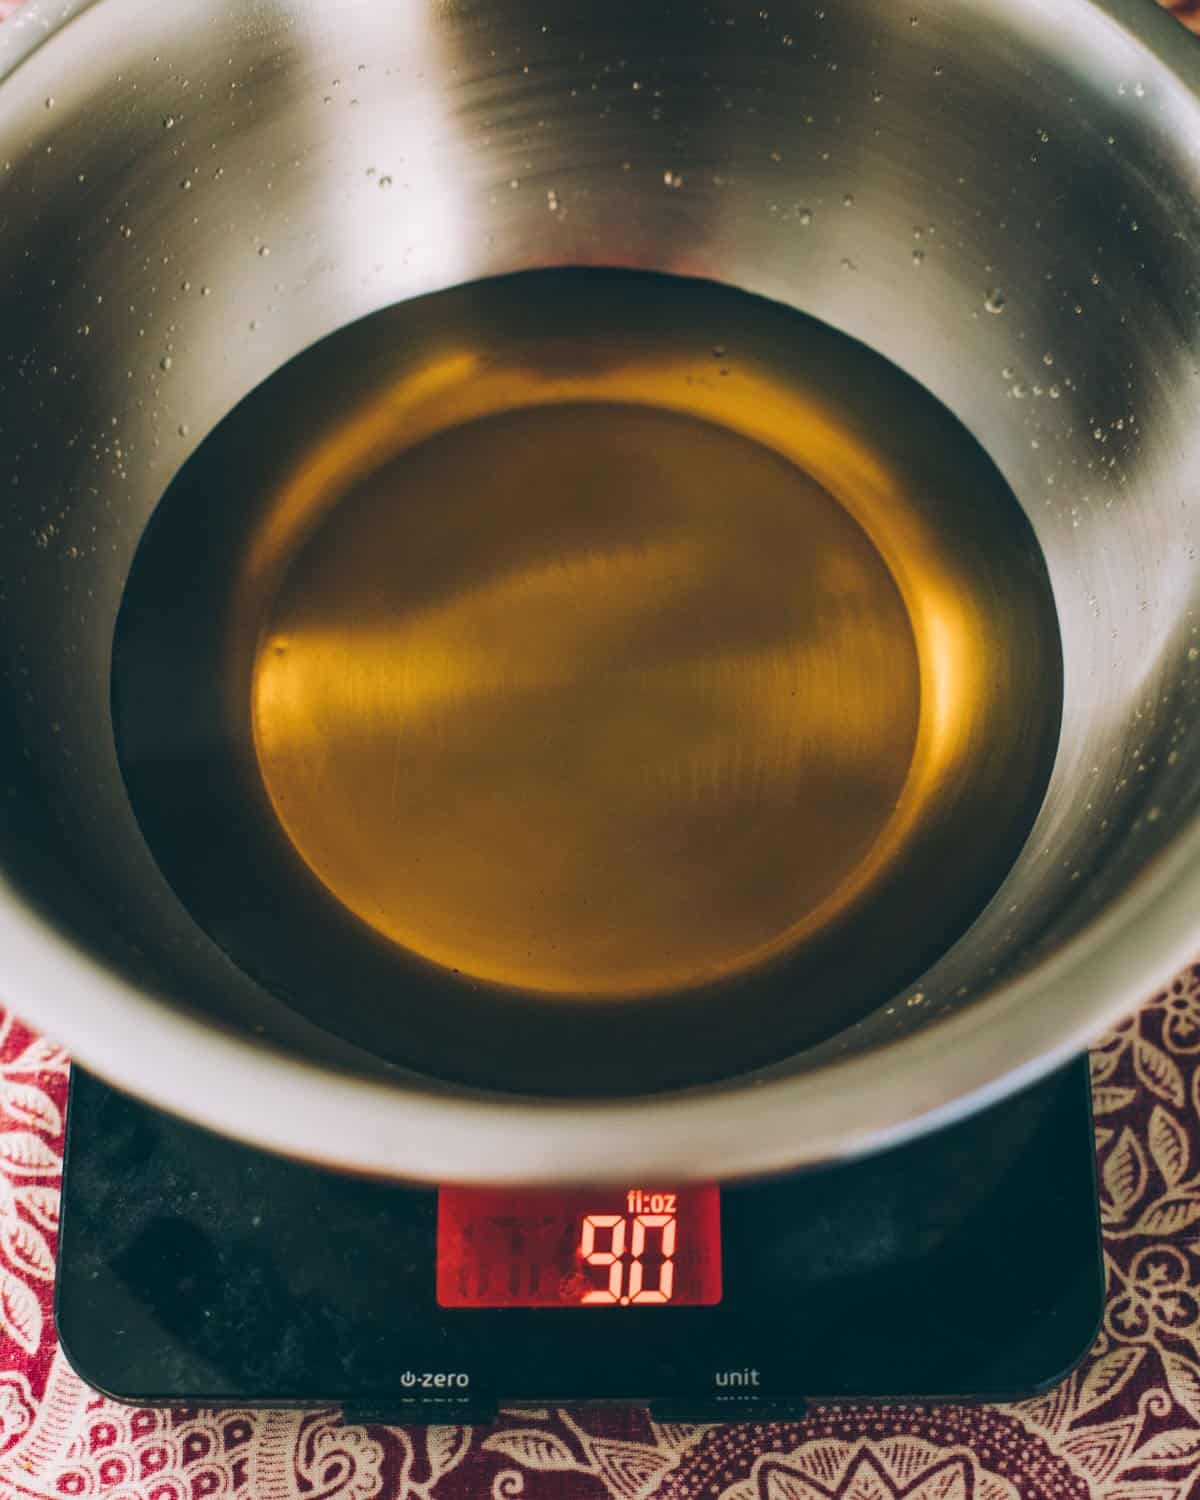 weighing the oils on a kitchen scale